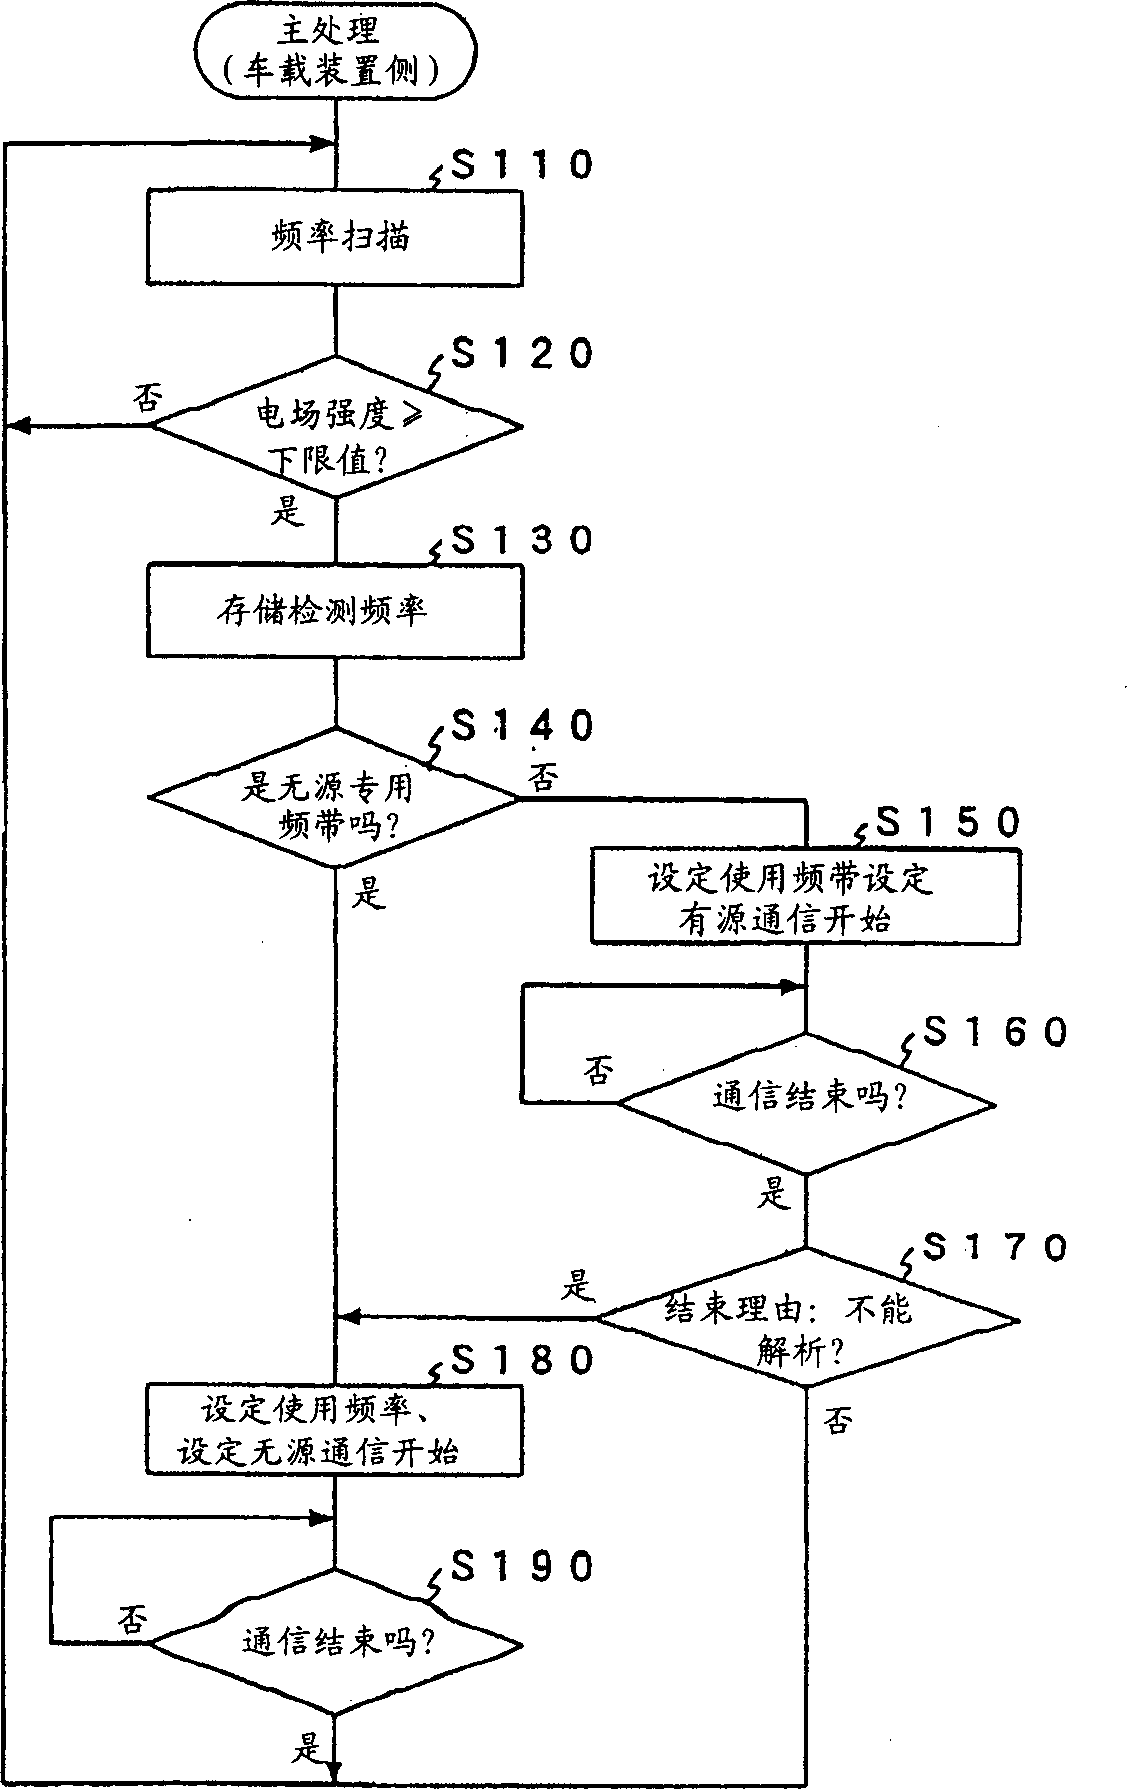 Path shop communication system, onboard device and device on road